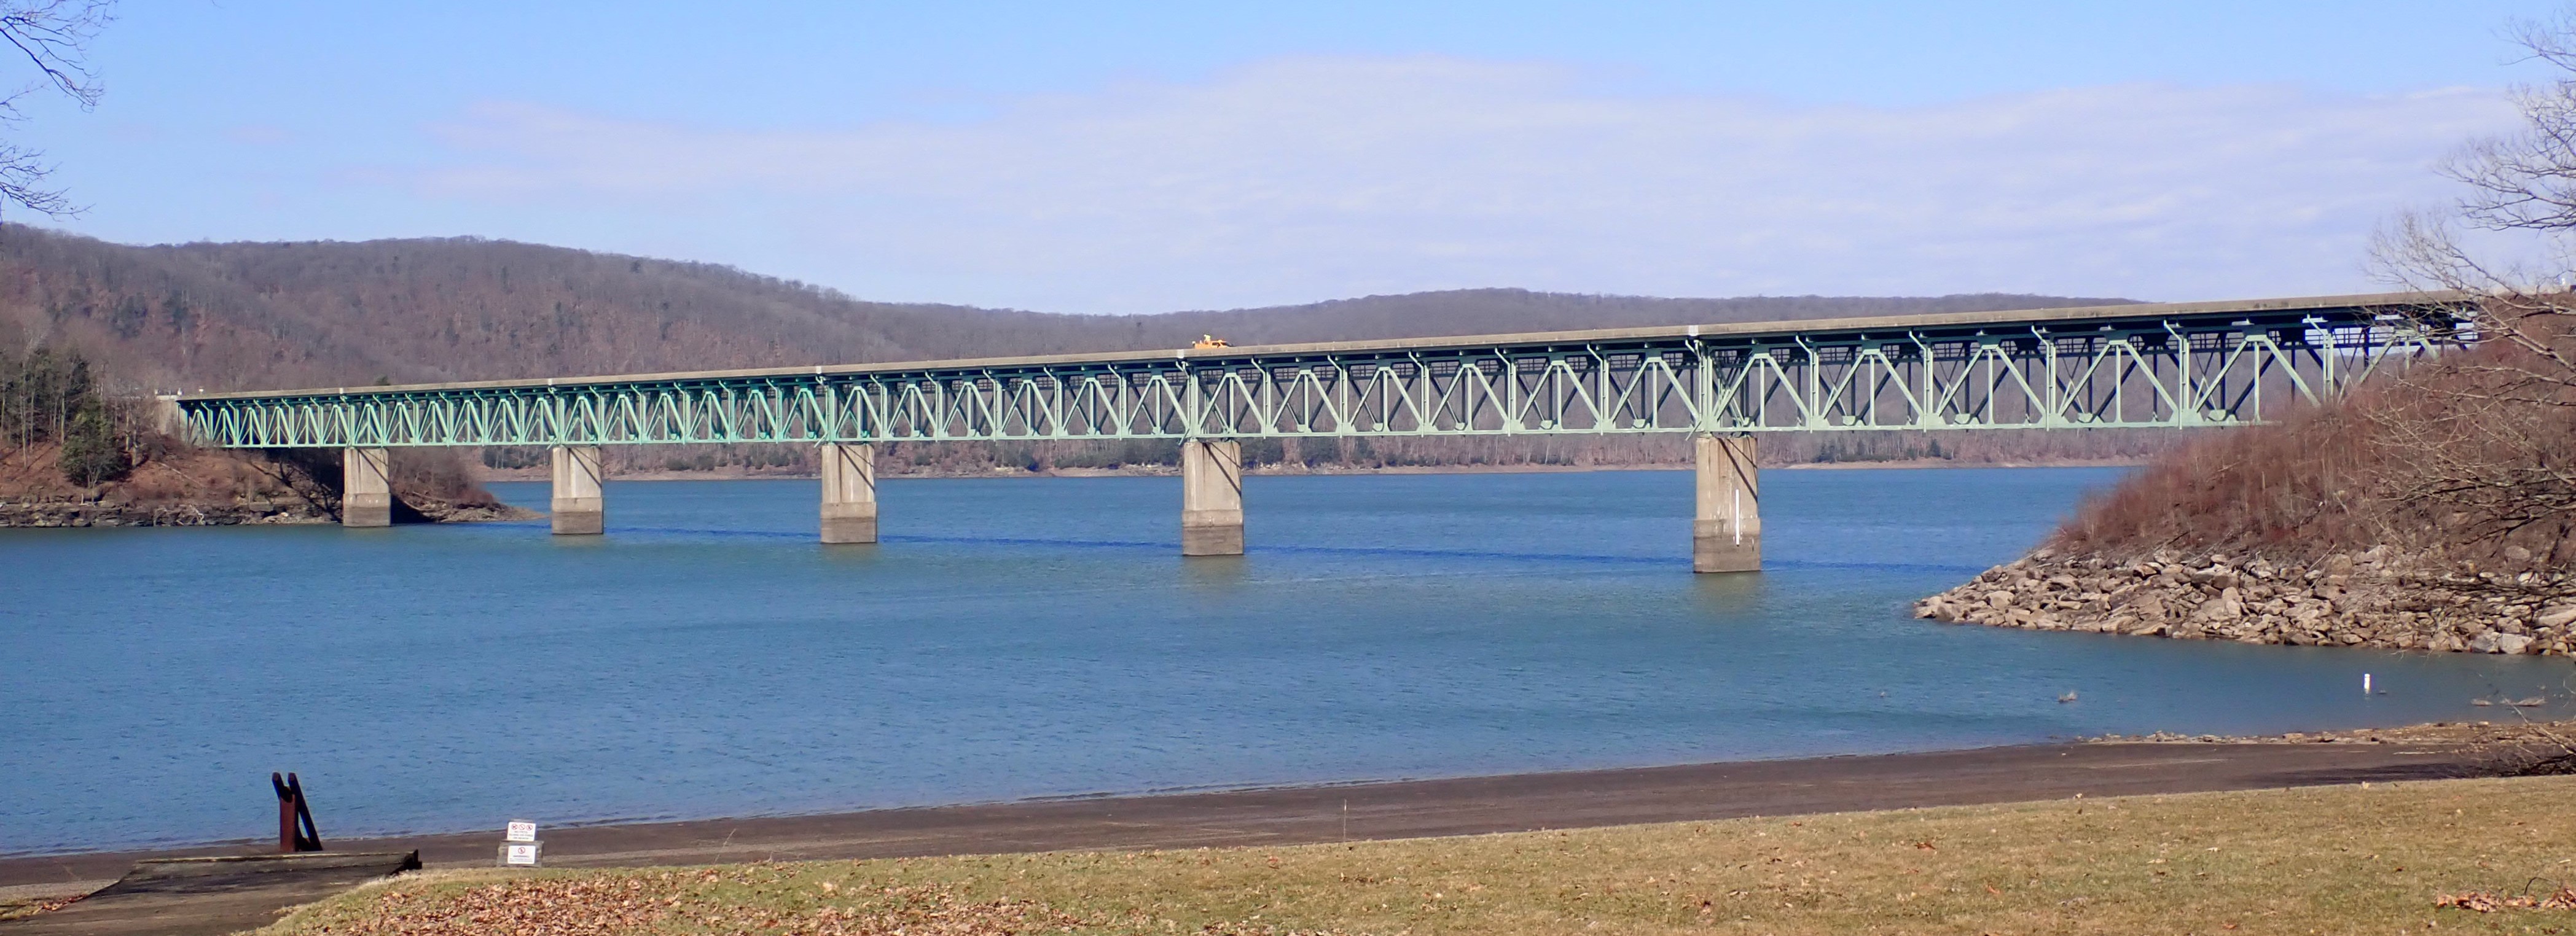 Route 59 bridge over the Allegheny Reservoir